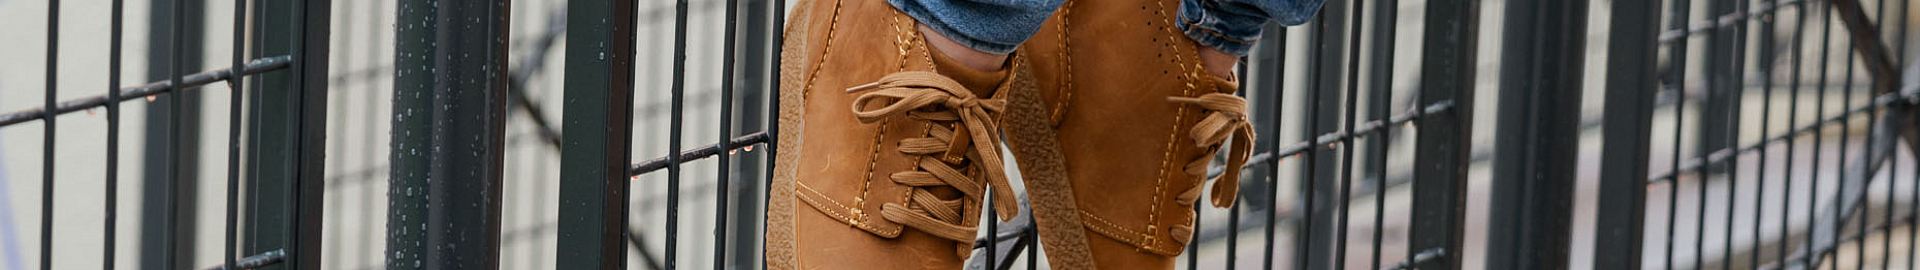 Chaussures à lacets Mephitsto pour hommes